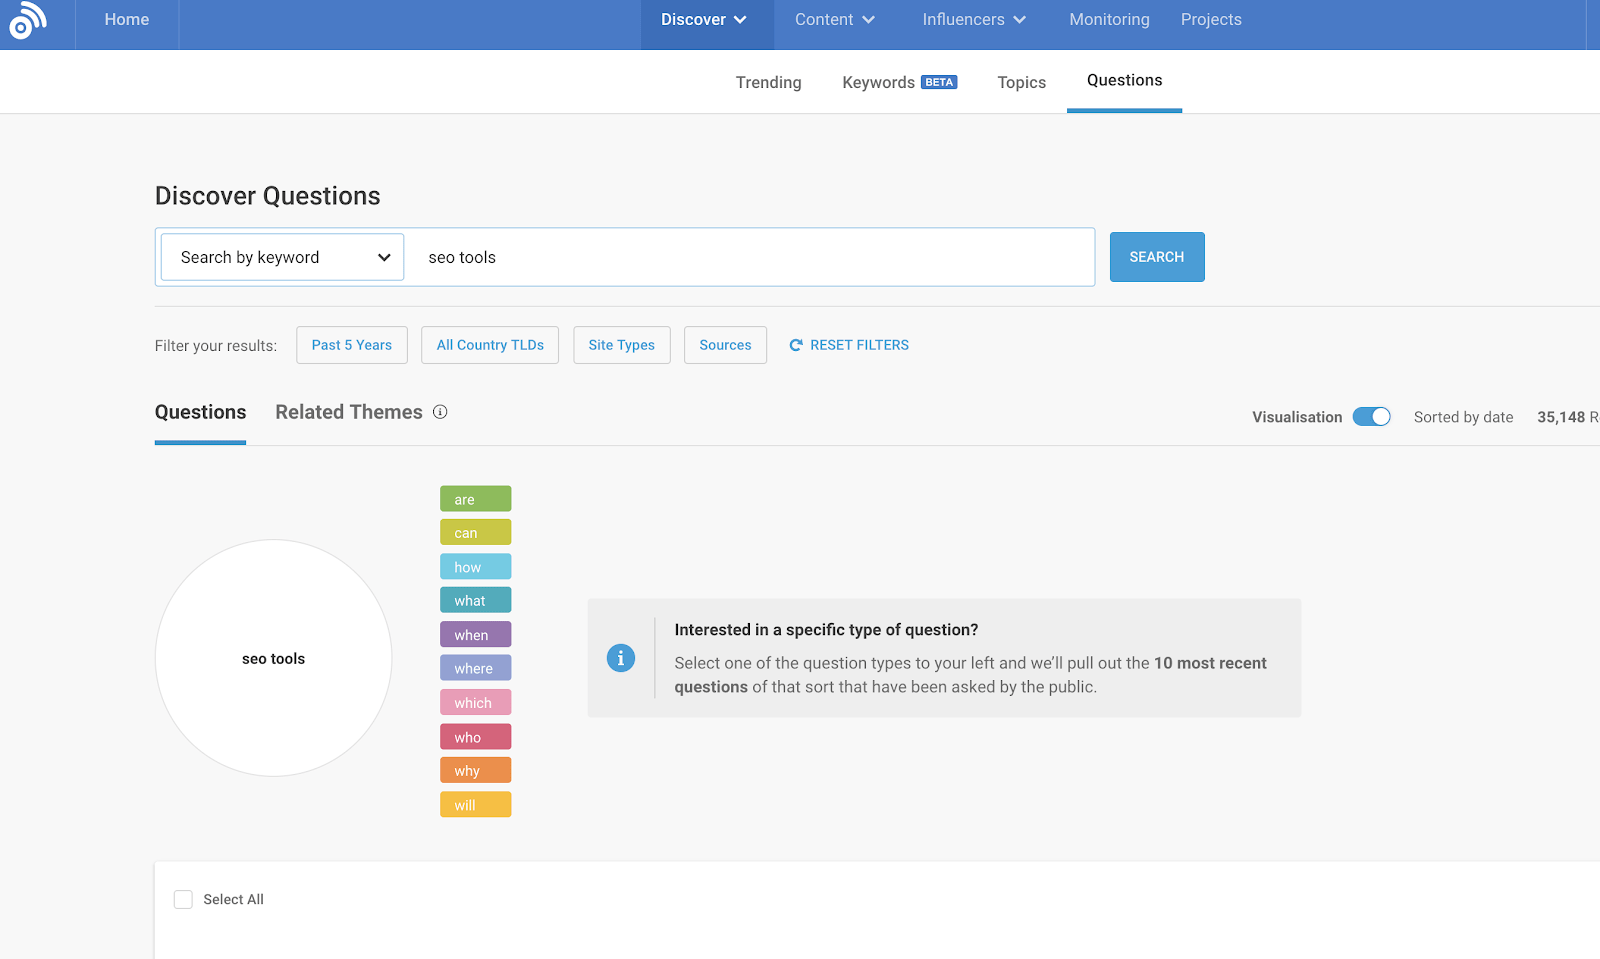 BuzzSumo helps find questions on the web related to a given keyword